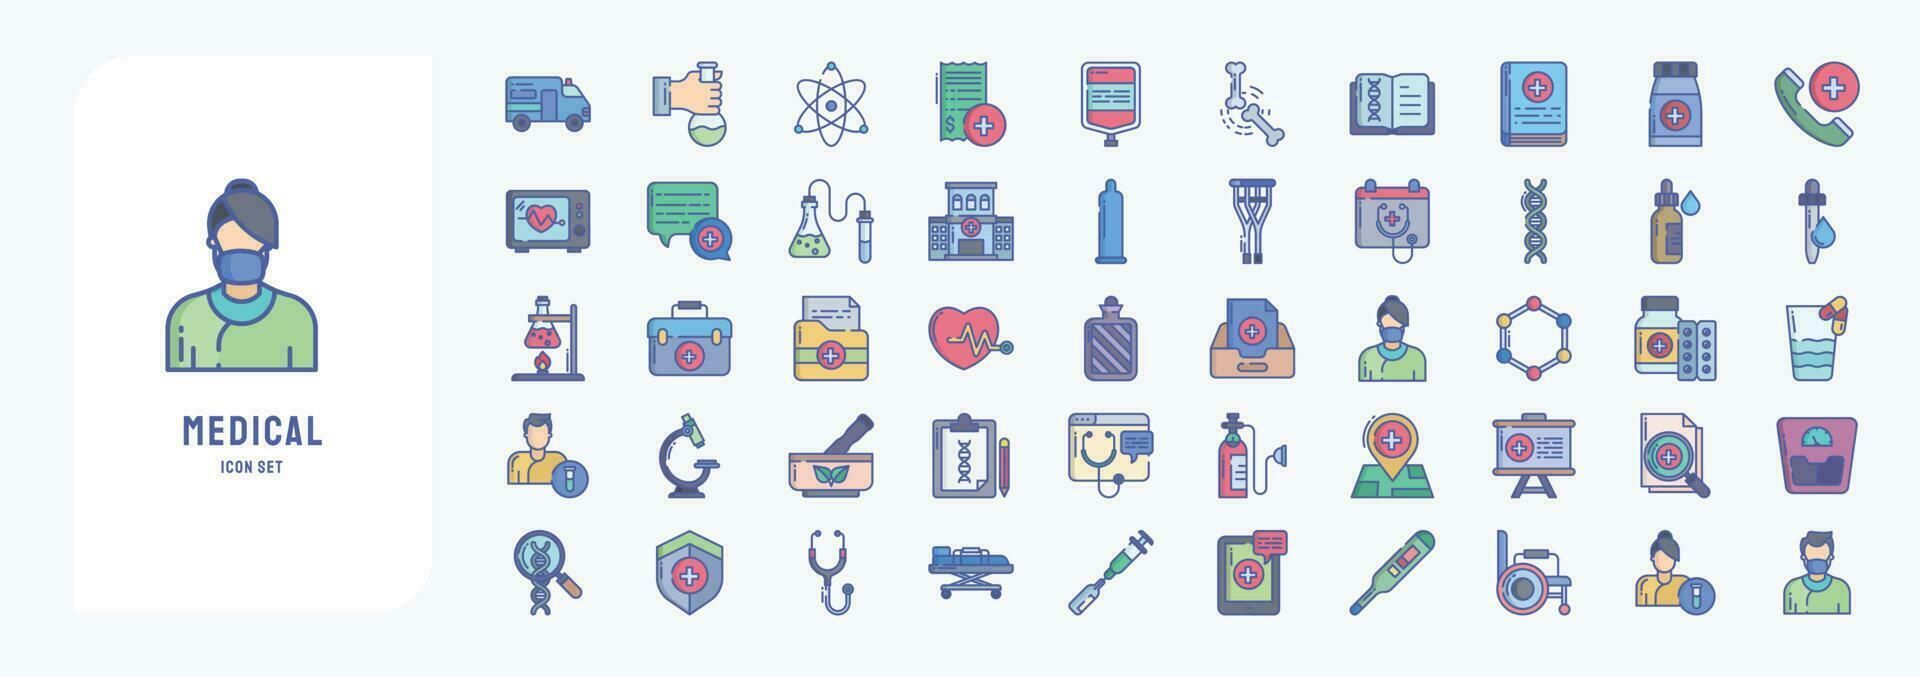 Medical and Hospital, including icons like Ambulance, Atom, Blood, Bone and more vector